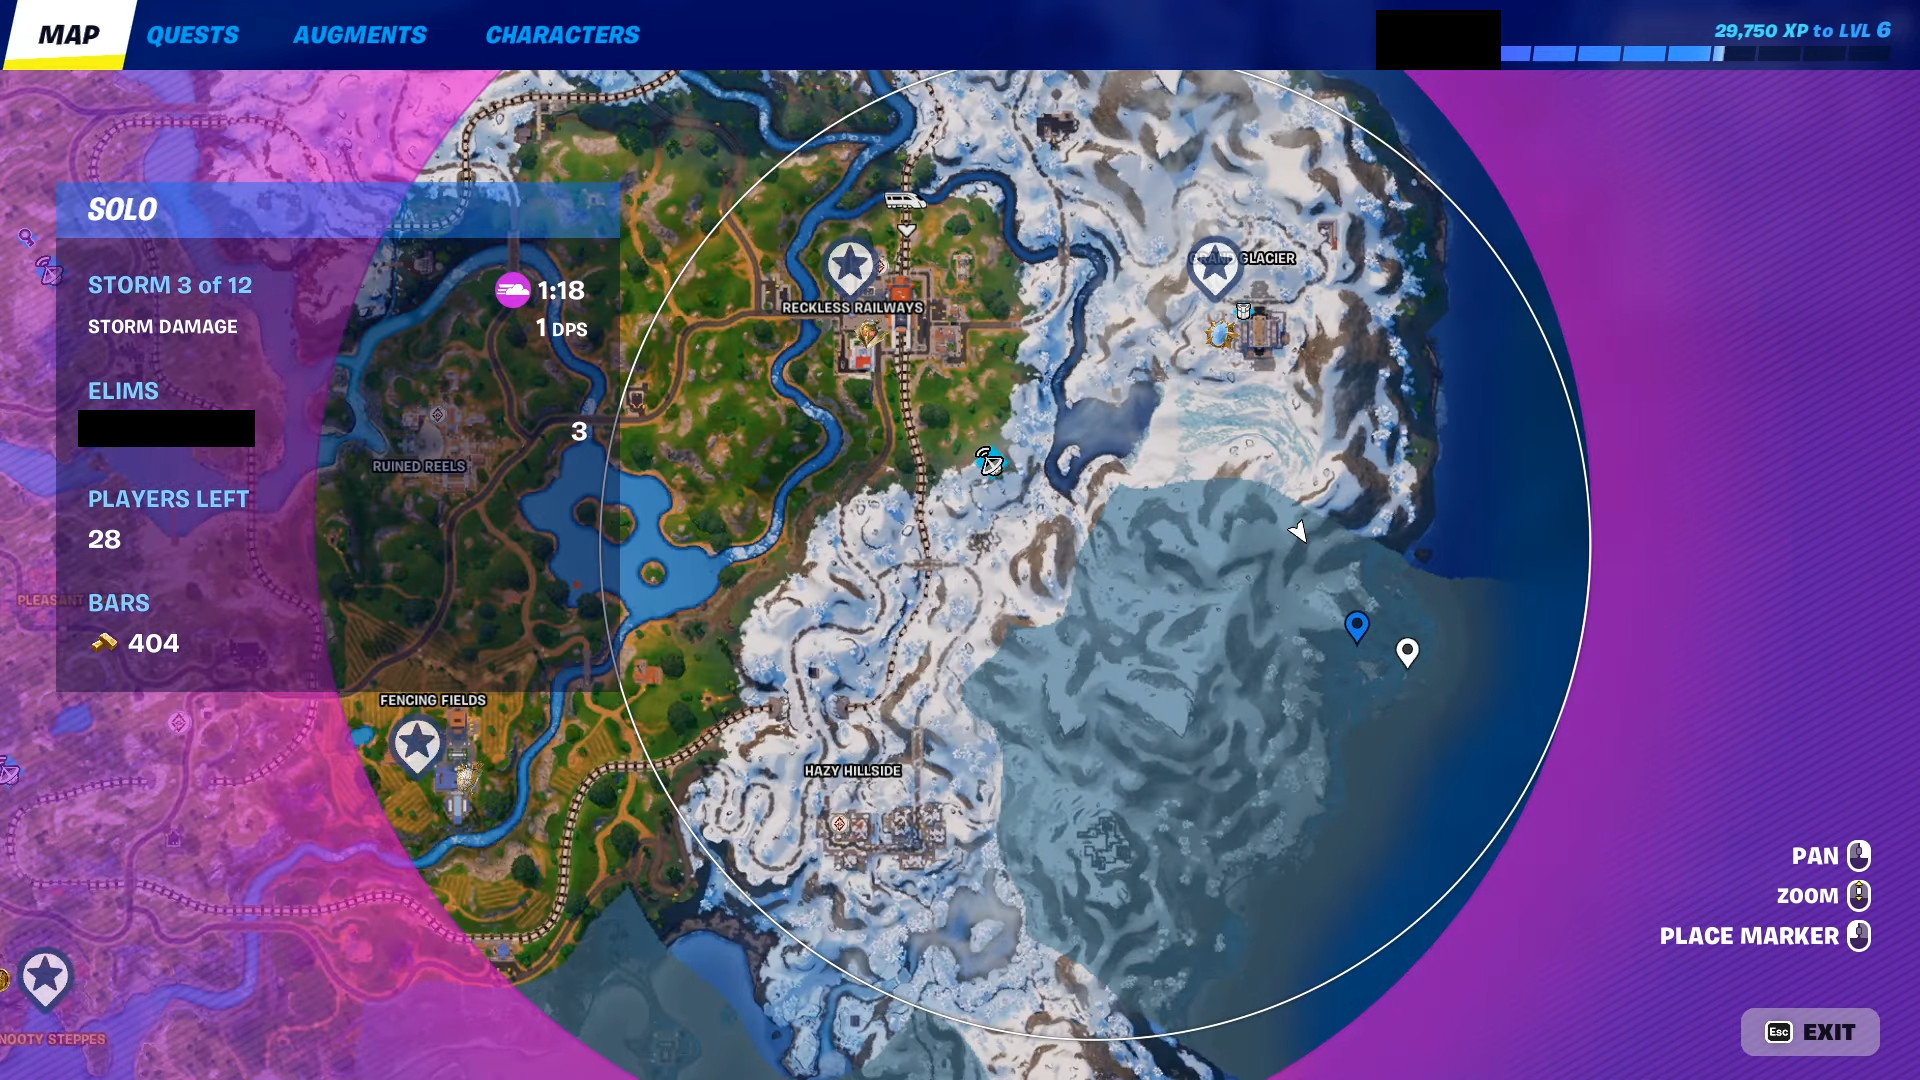 A fortnite map showing a cave location.